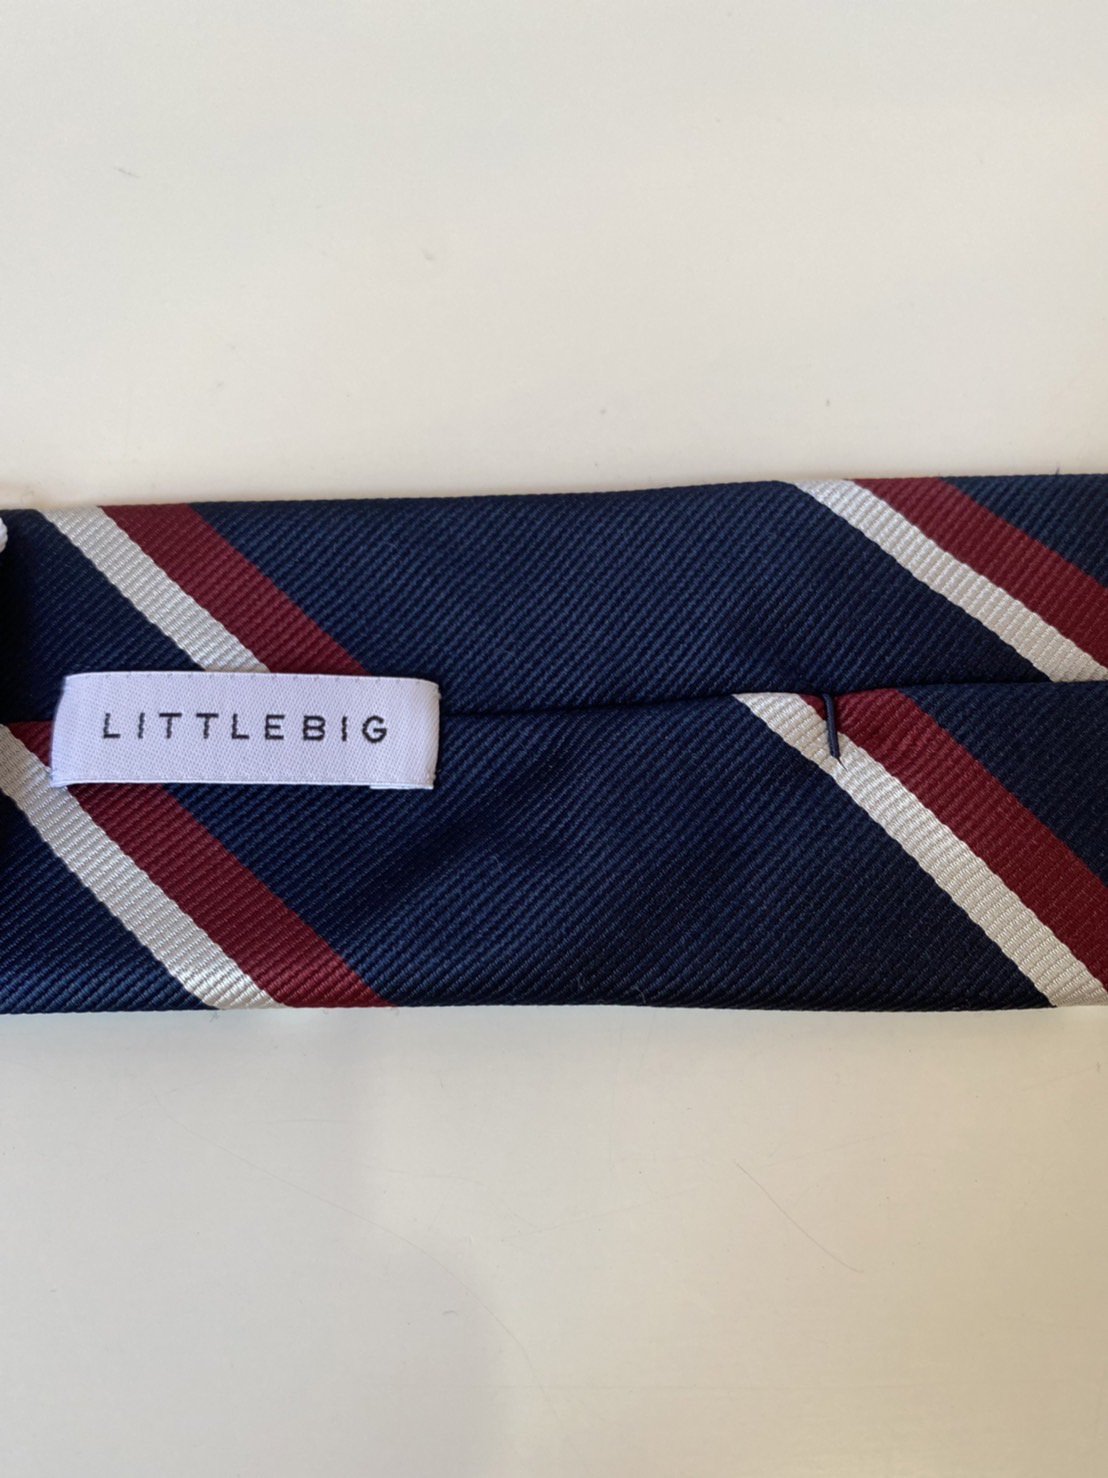 LITTLEBIG<br />Regimental Tie / Navy<img class='new_mark_img2' src='https://img.shop-pro.jp/img/new/icons14.gif' style='border:none;display:inline;margin:0px;padding:0px;width:auto;' />